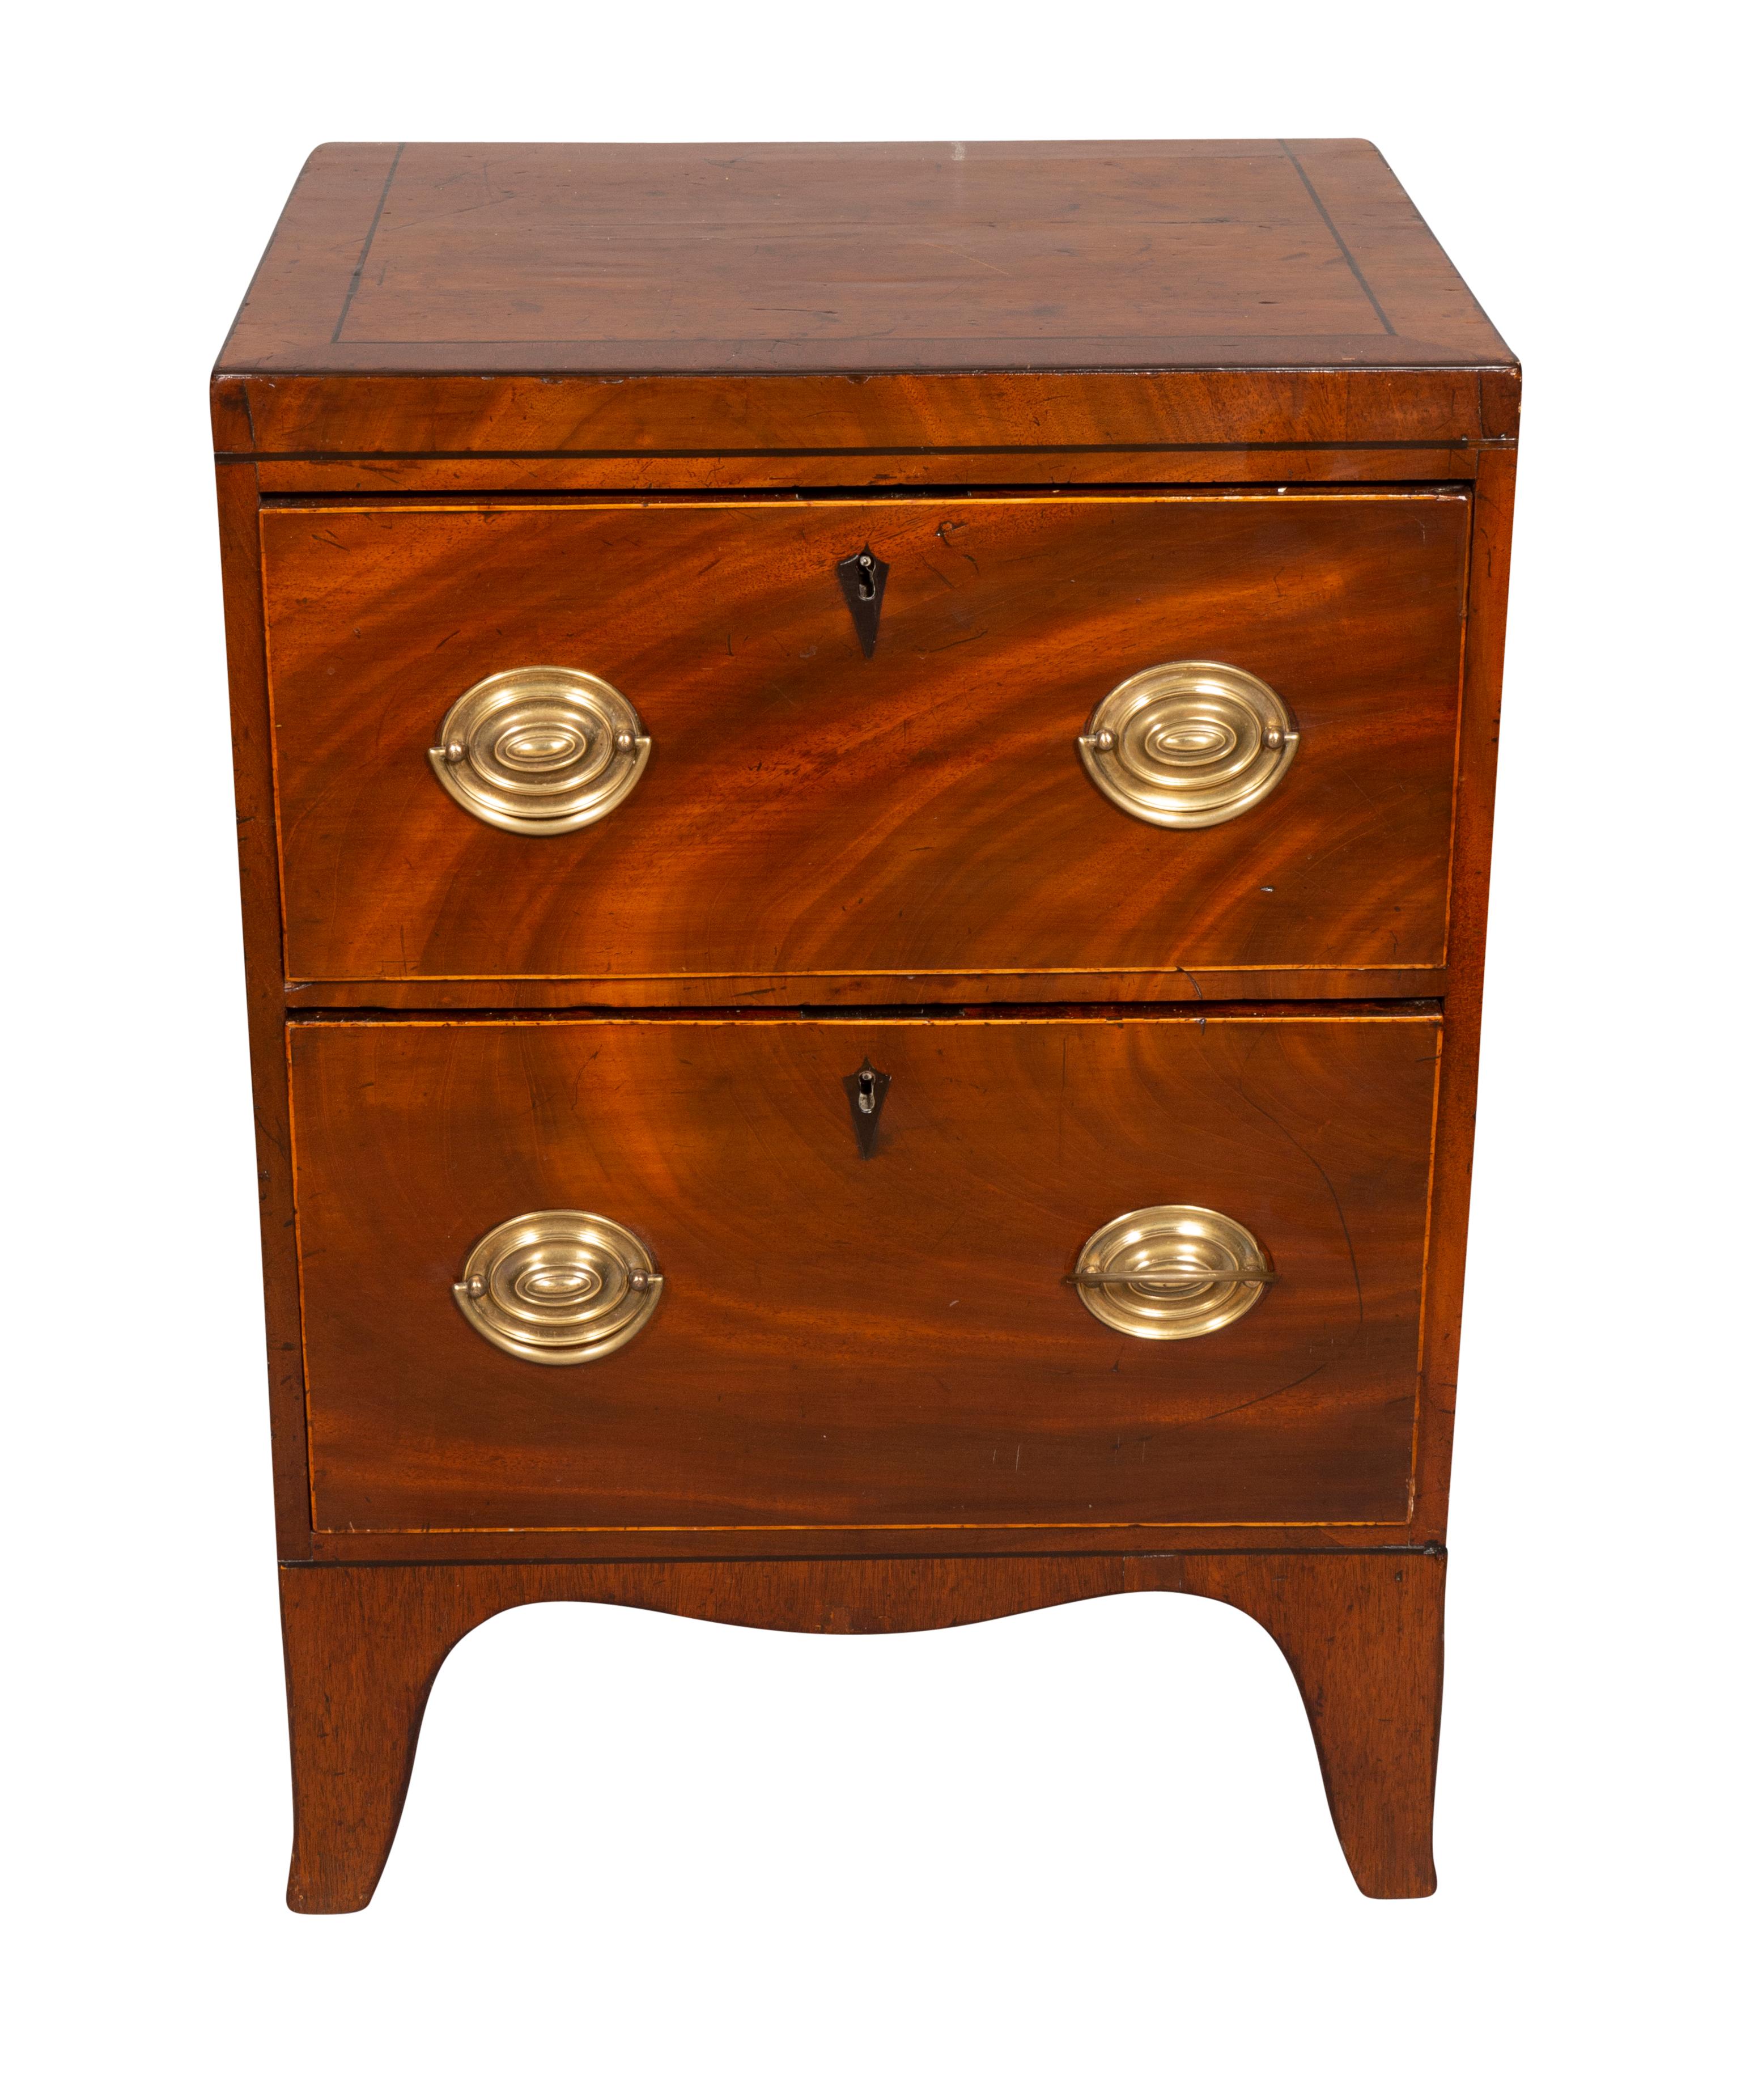 A cute chest of unusually small size perfect for a bedside table or end table. Rectangular top over two drawers. Oval brass handles and ending on French feet.